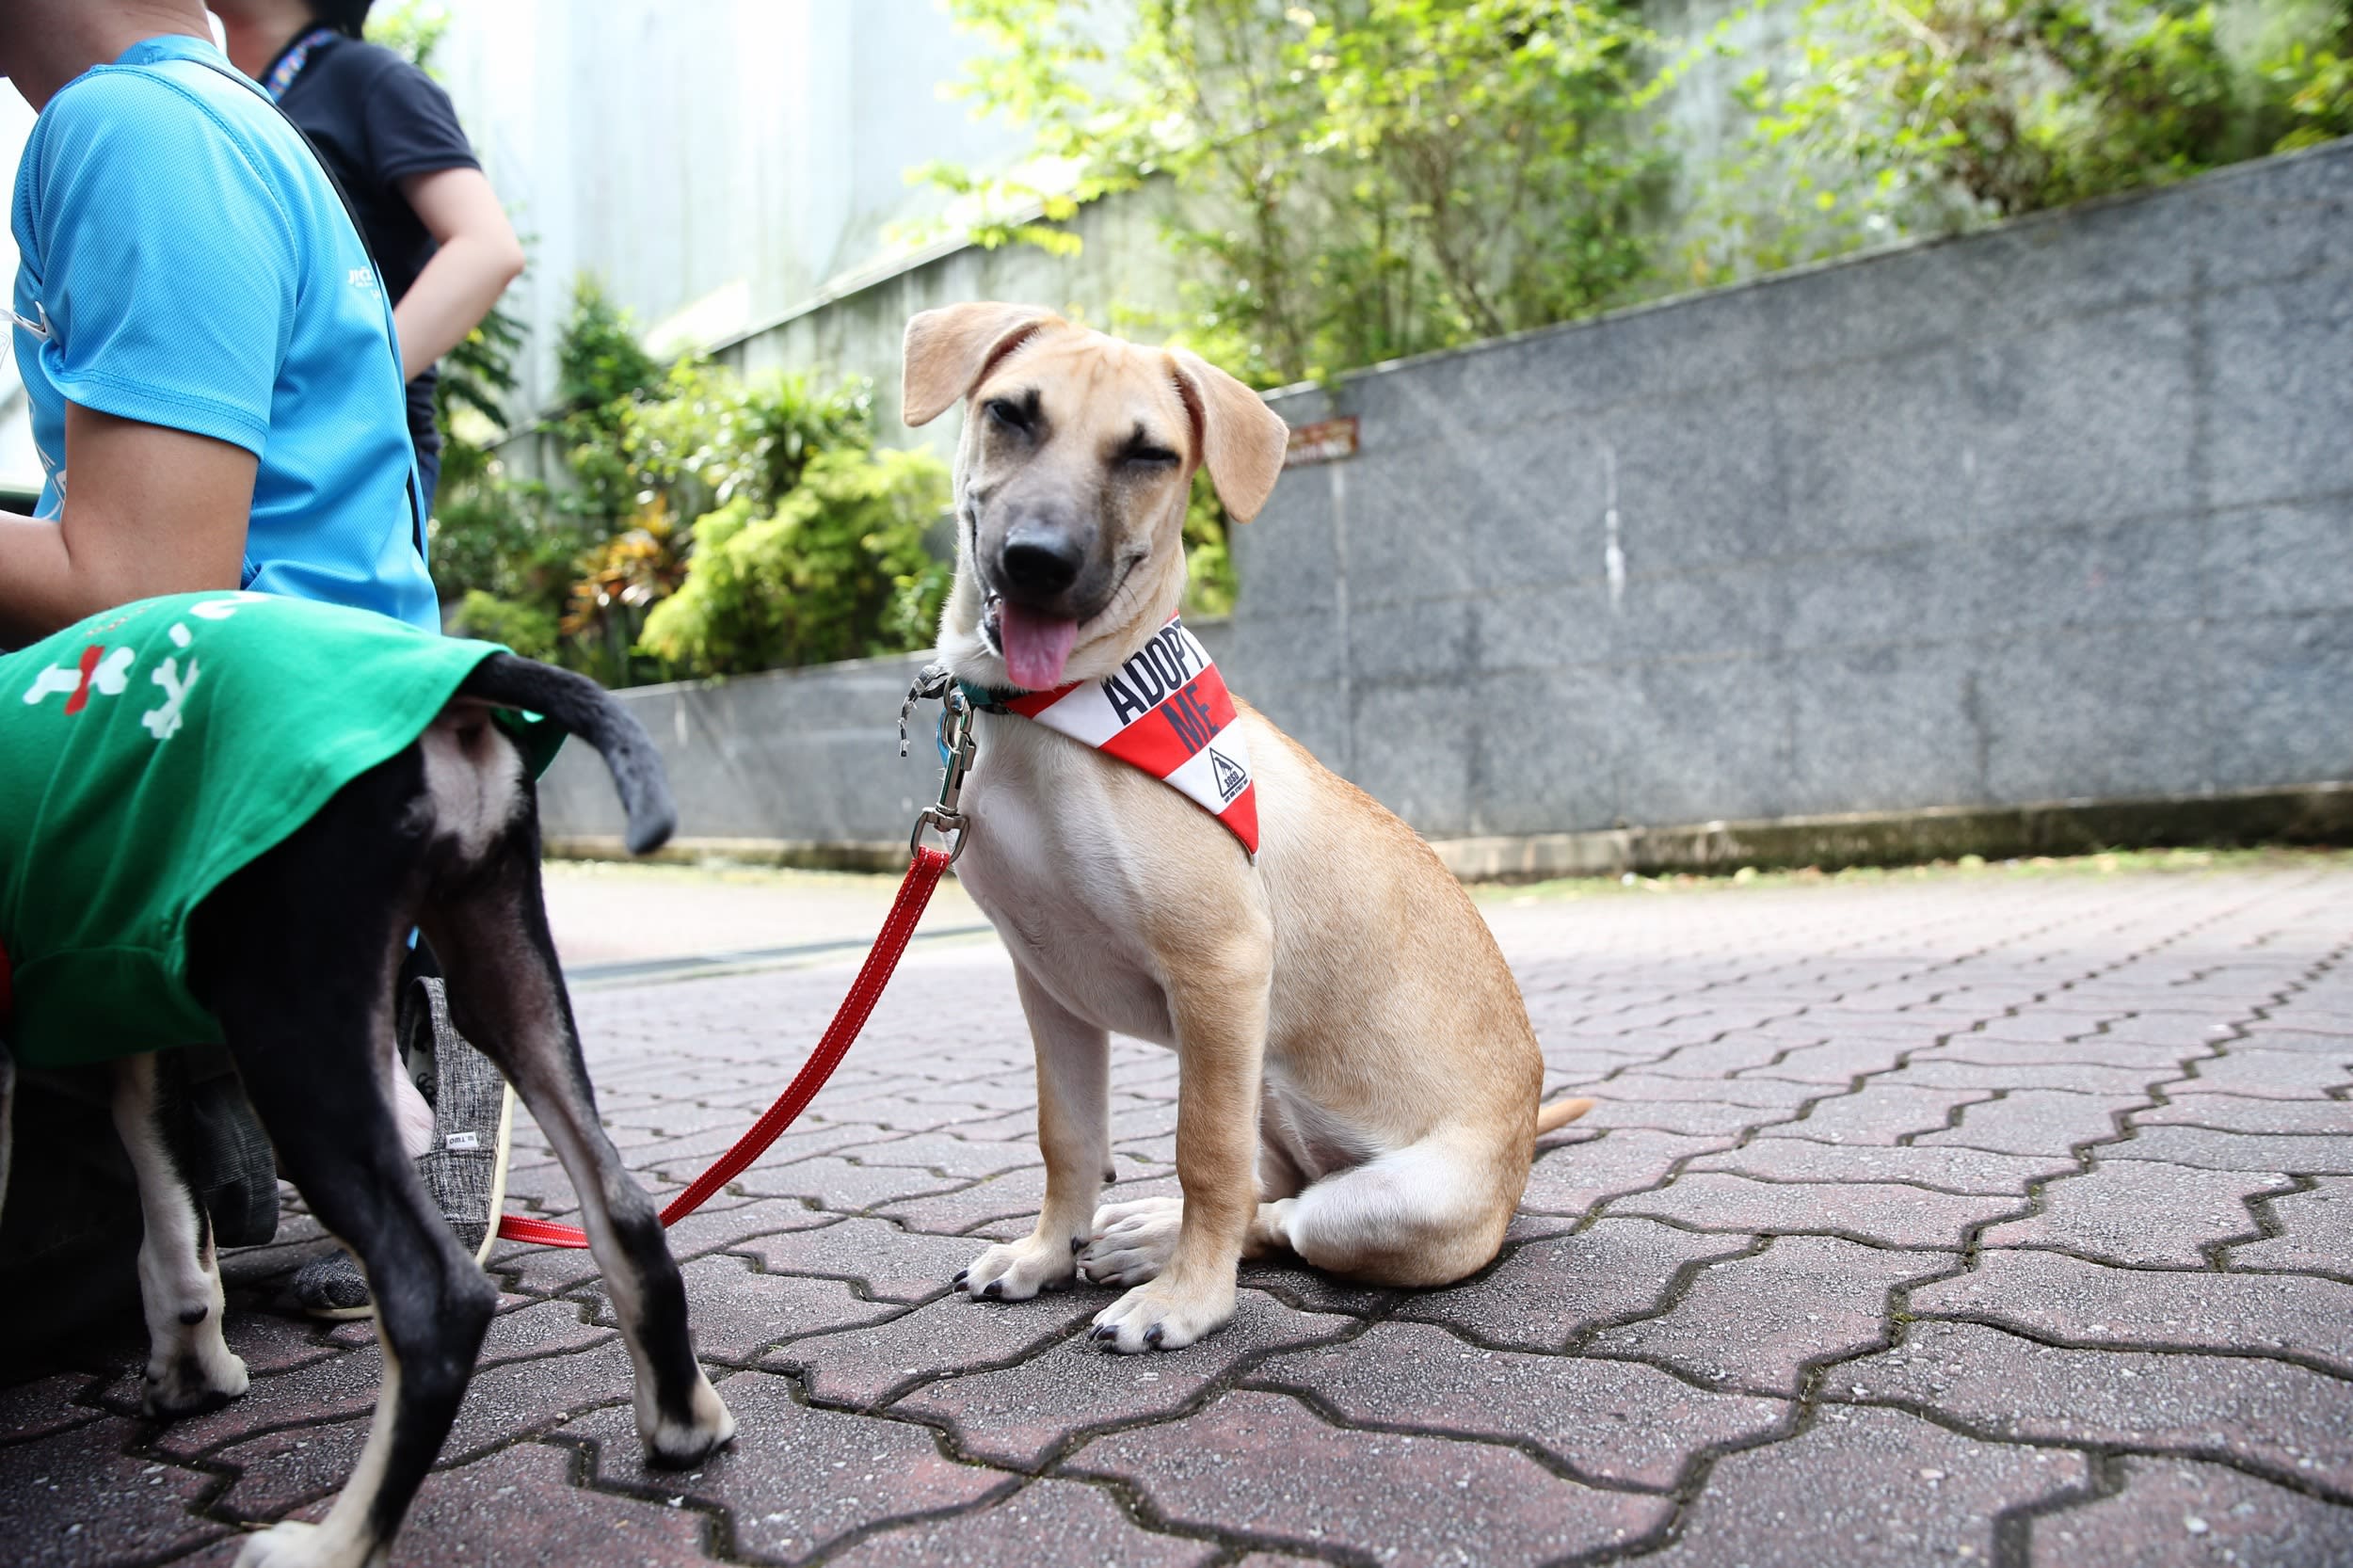 New guidelines launched for dog adoption and training, but welfare groups wish for more 'bite' than bark